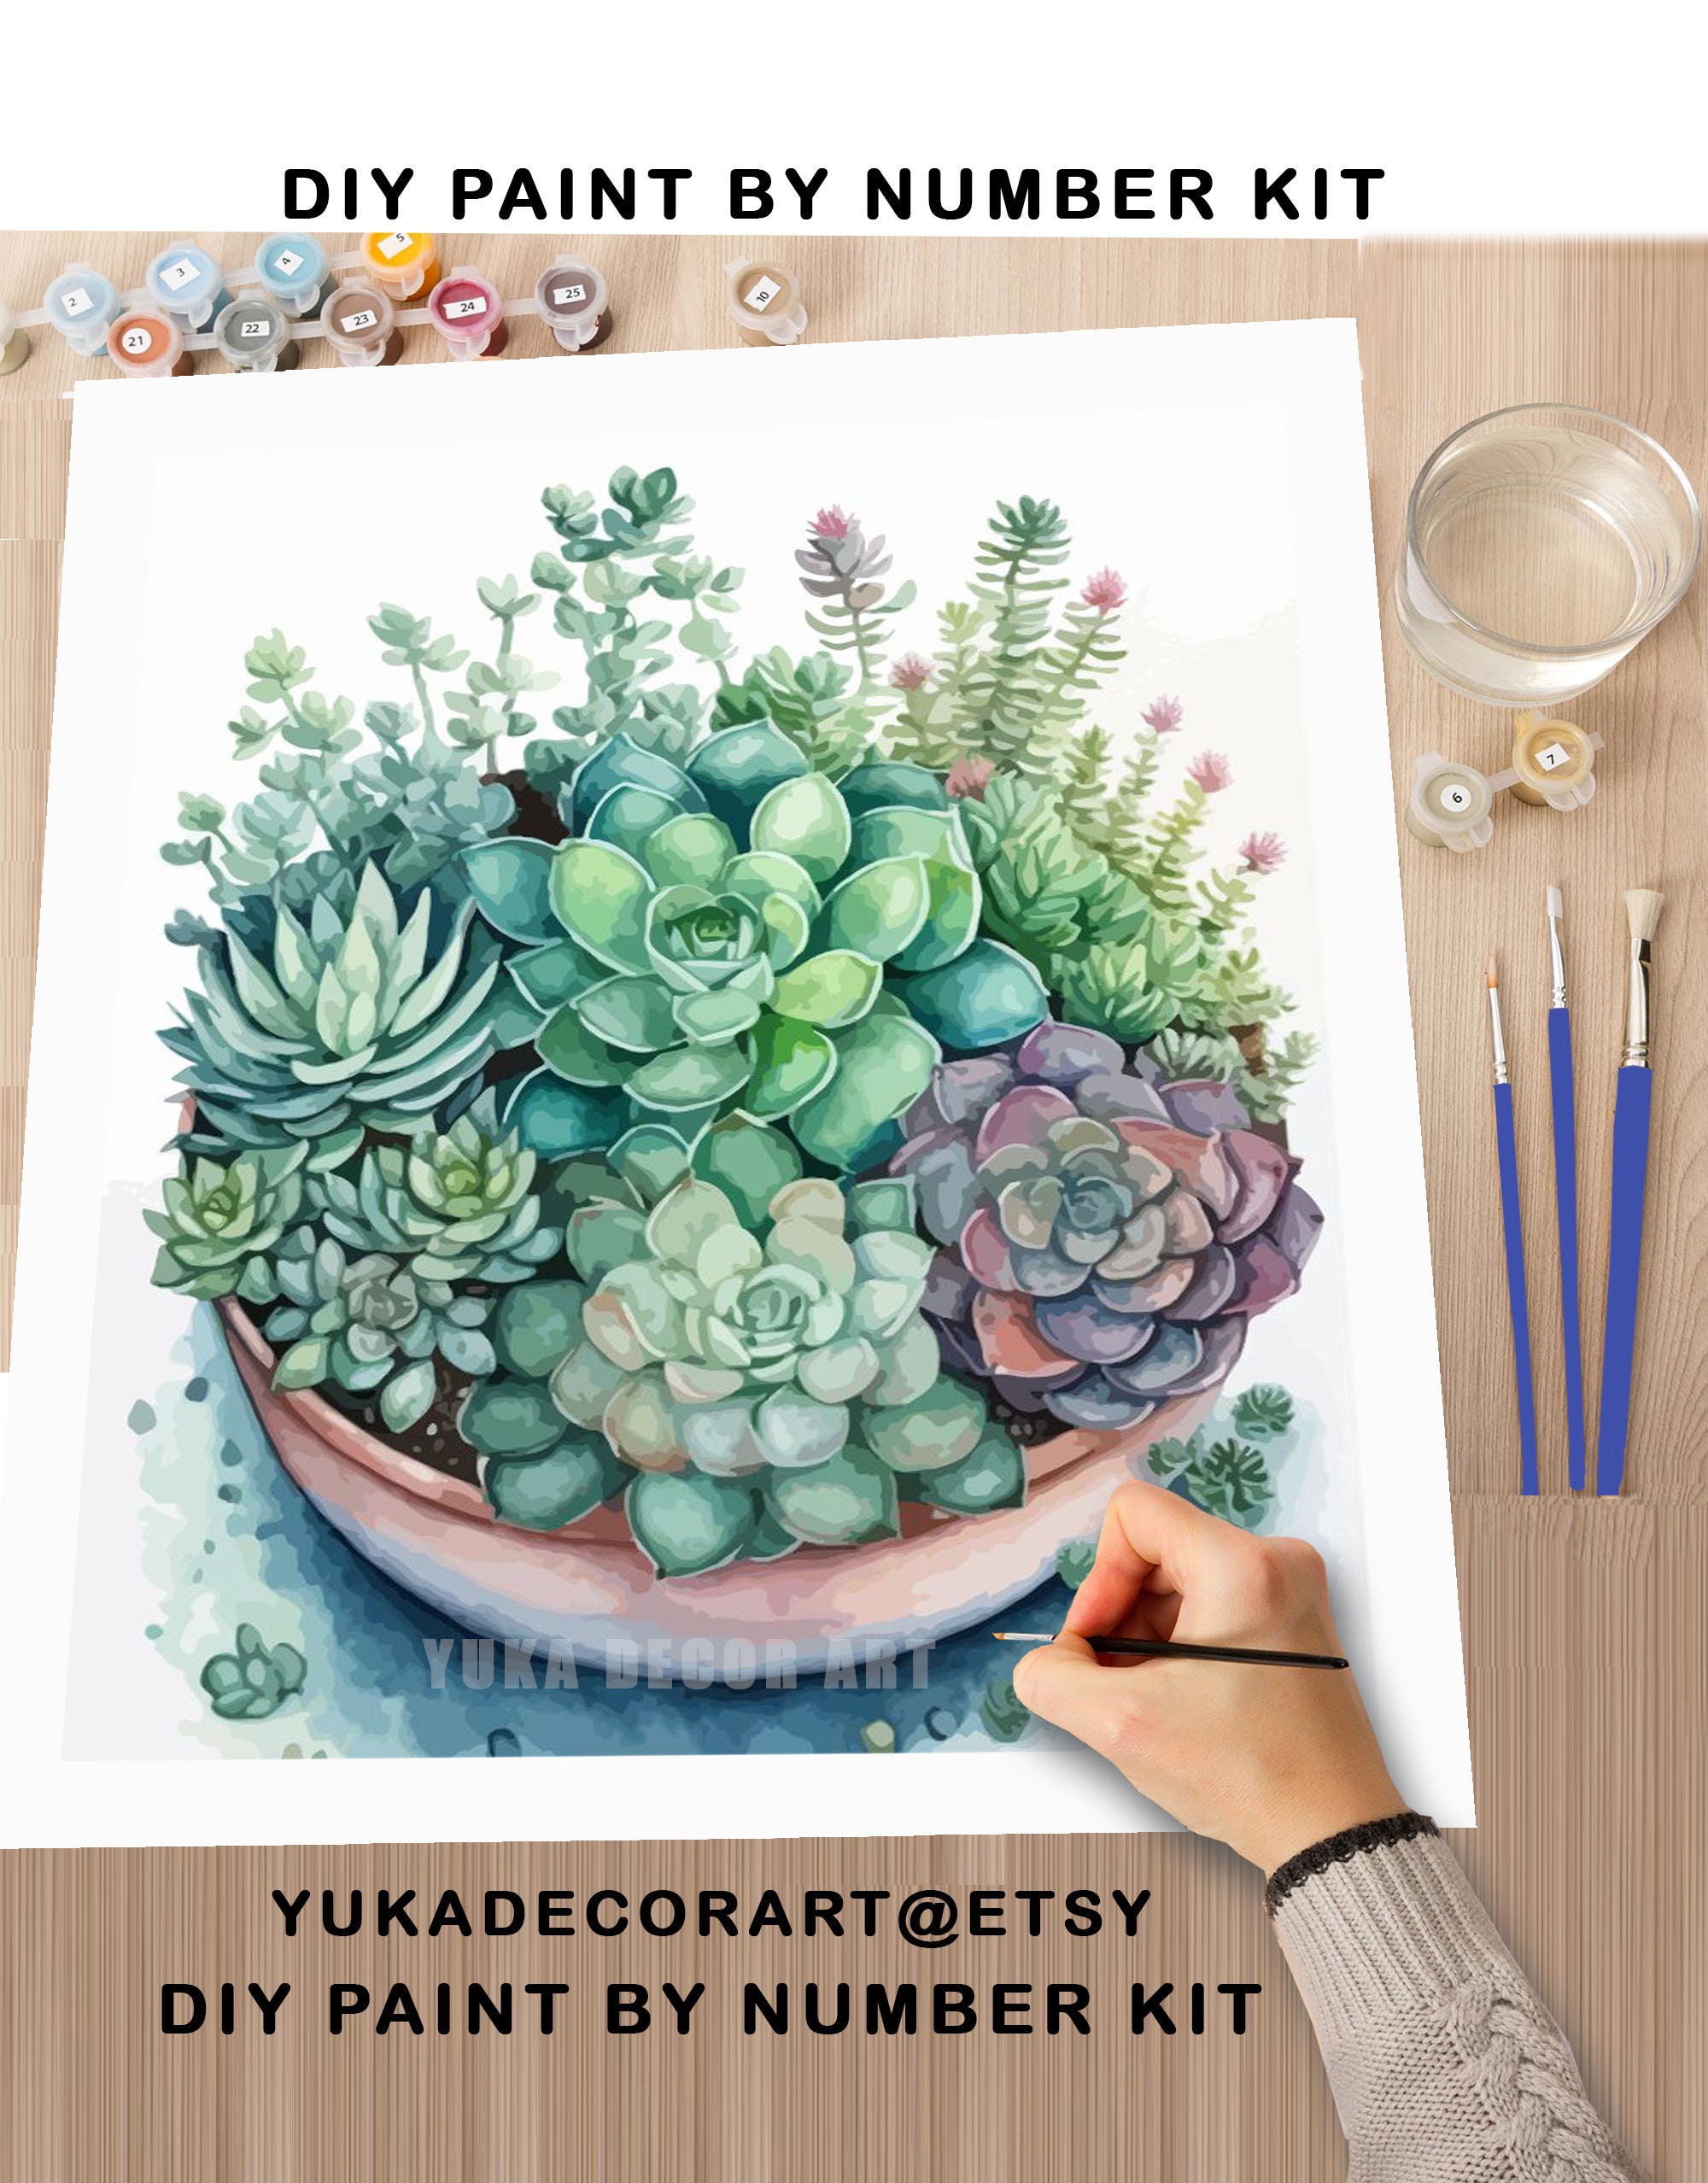 Succulents PAINT by NUMBERS Kit Adult Garden Lover Gift Easy DIY